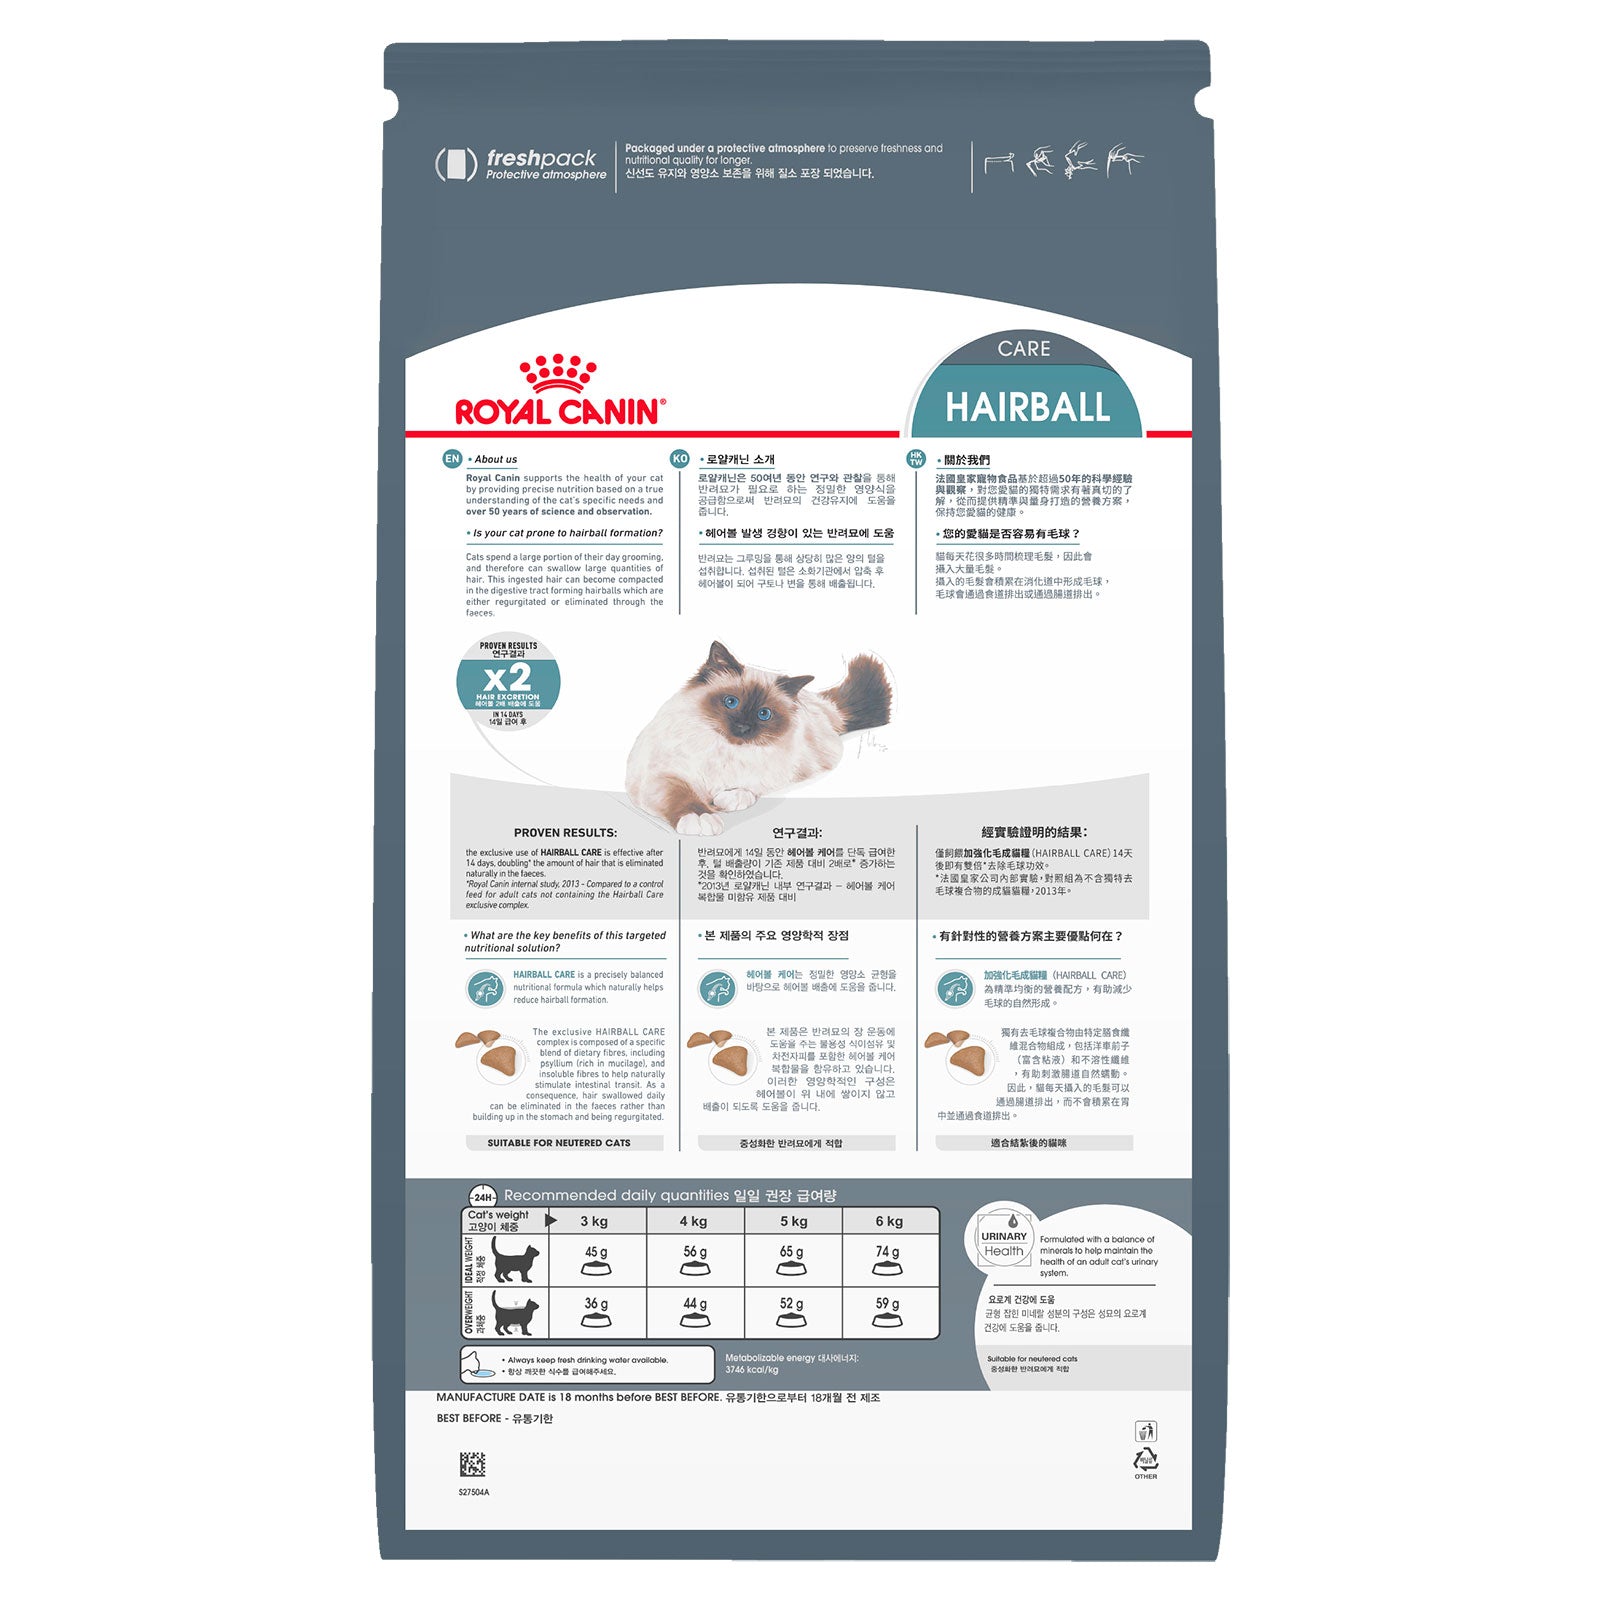 Royal Canin Cat Food Adult Hairball Care